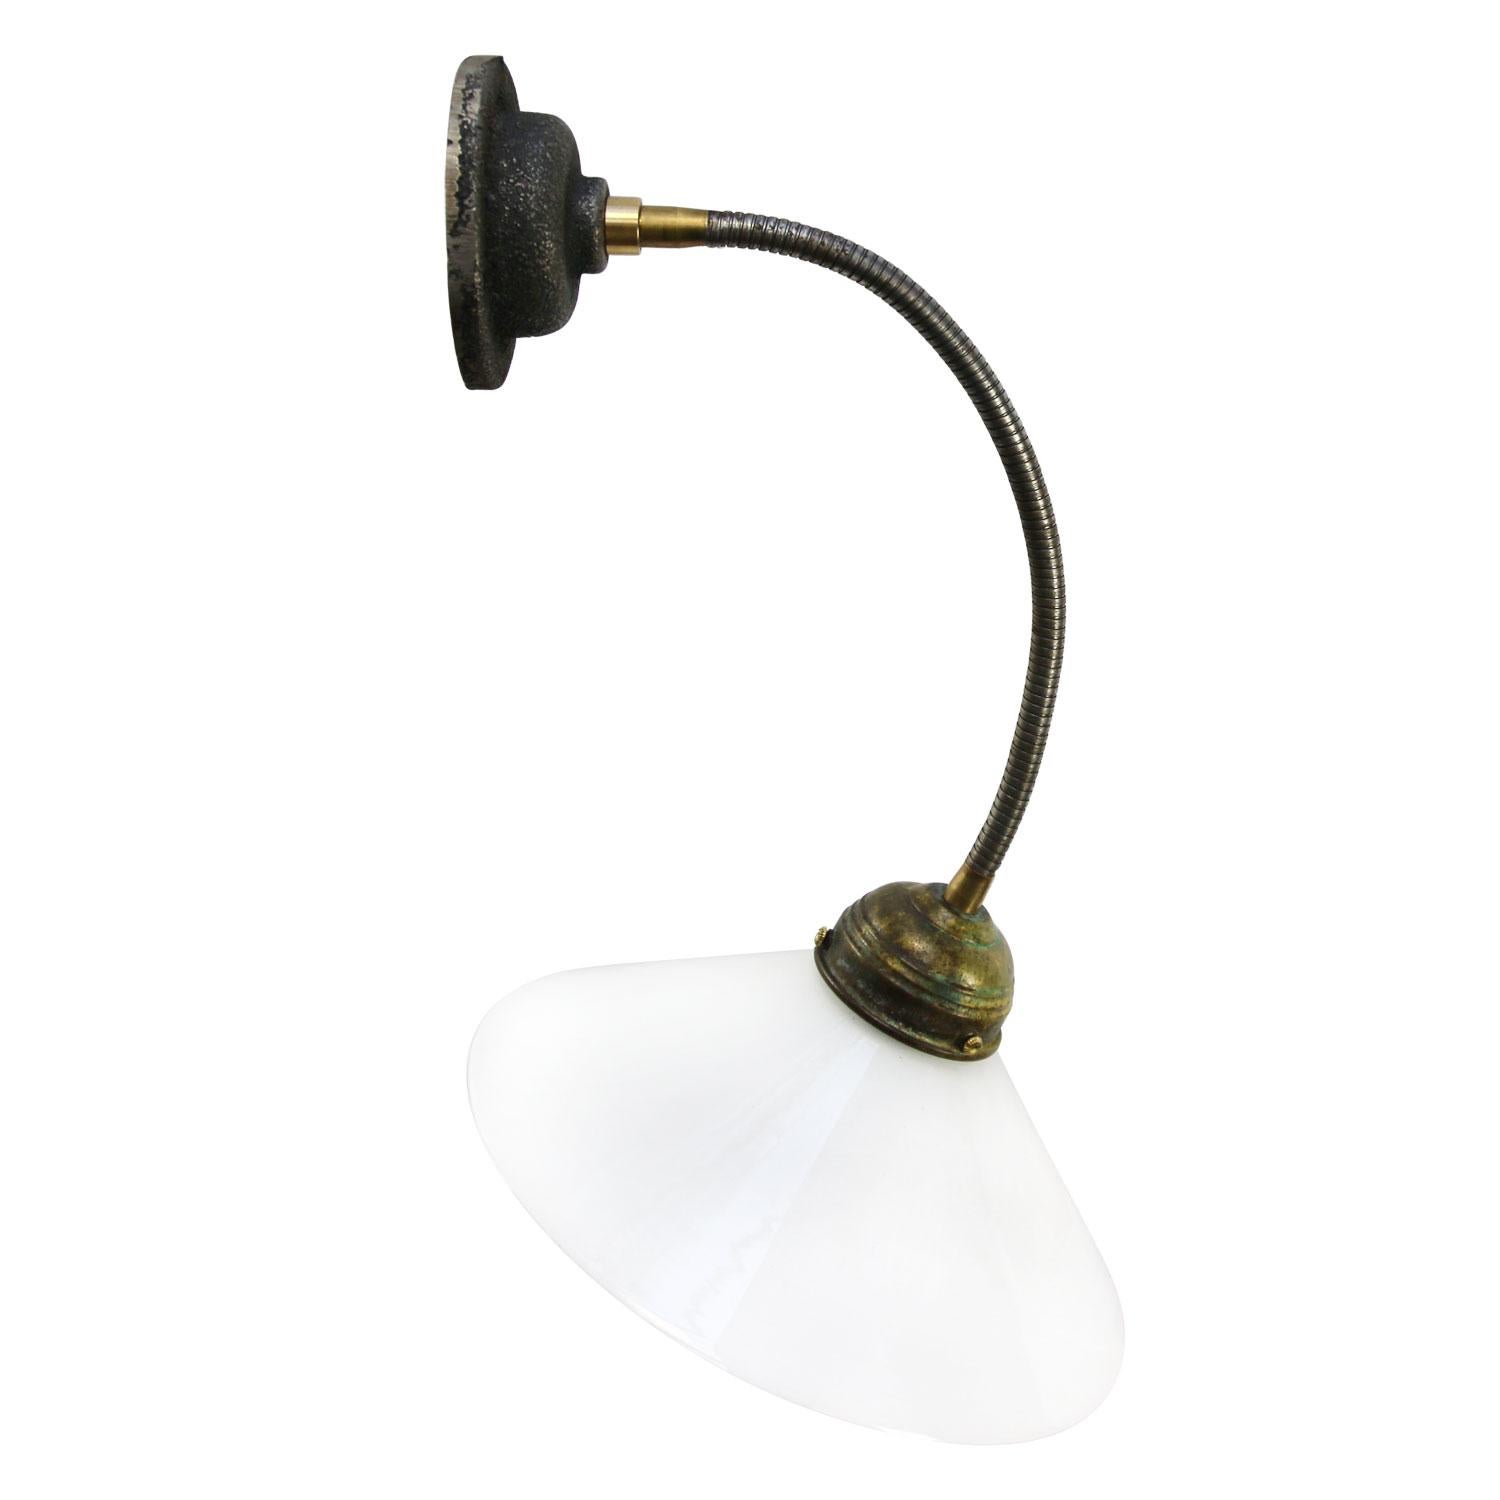 Wall light spot down lighter
White opaline glass.

Gooseneck arm adjustable in angle.

Diameter cast iron wall mount 10.5 cm / 4”
Weight: 1.50 kg / 3.3 lb

Priced per individual item. All lamps have been made suitable by international standards for